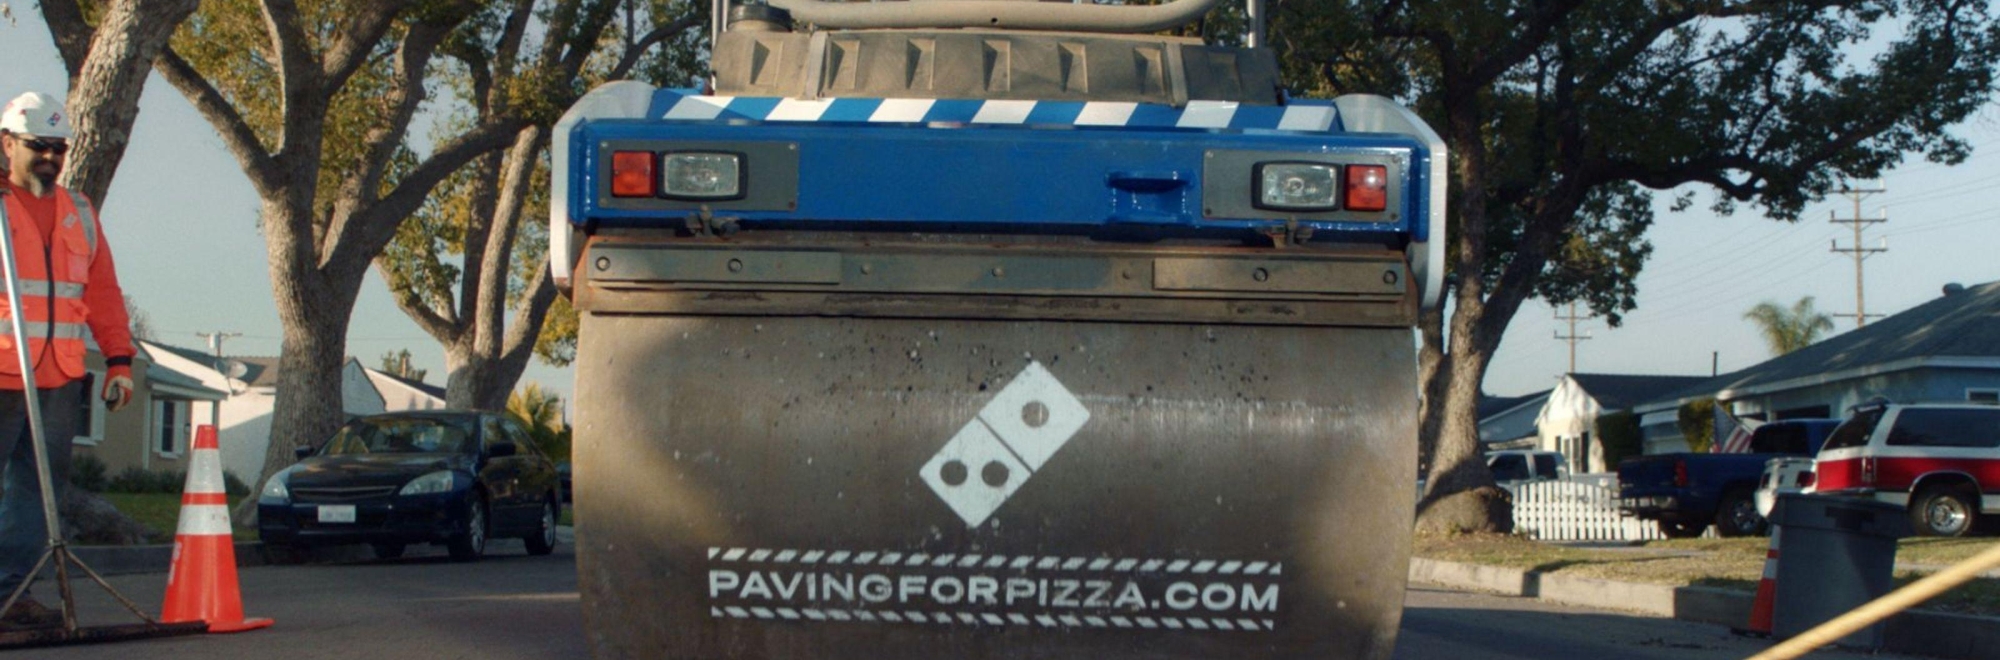 Domino’s gets down and dirty on the streets of America